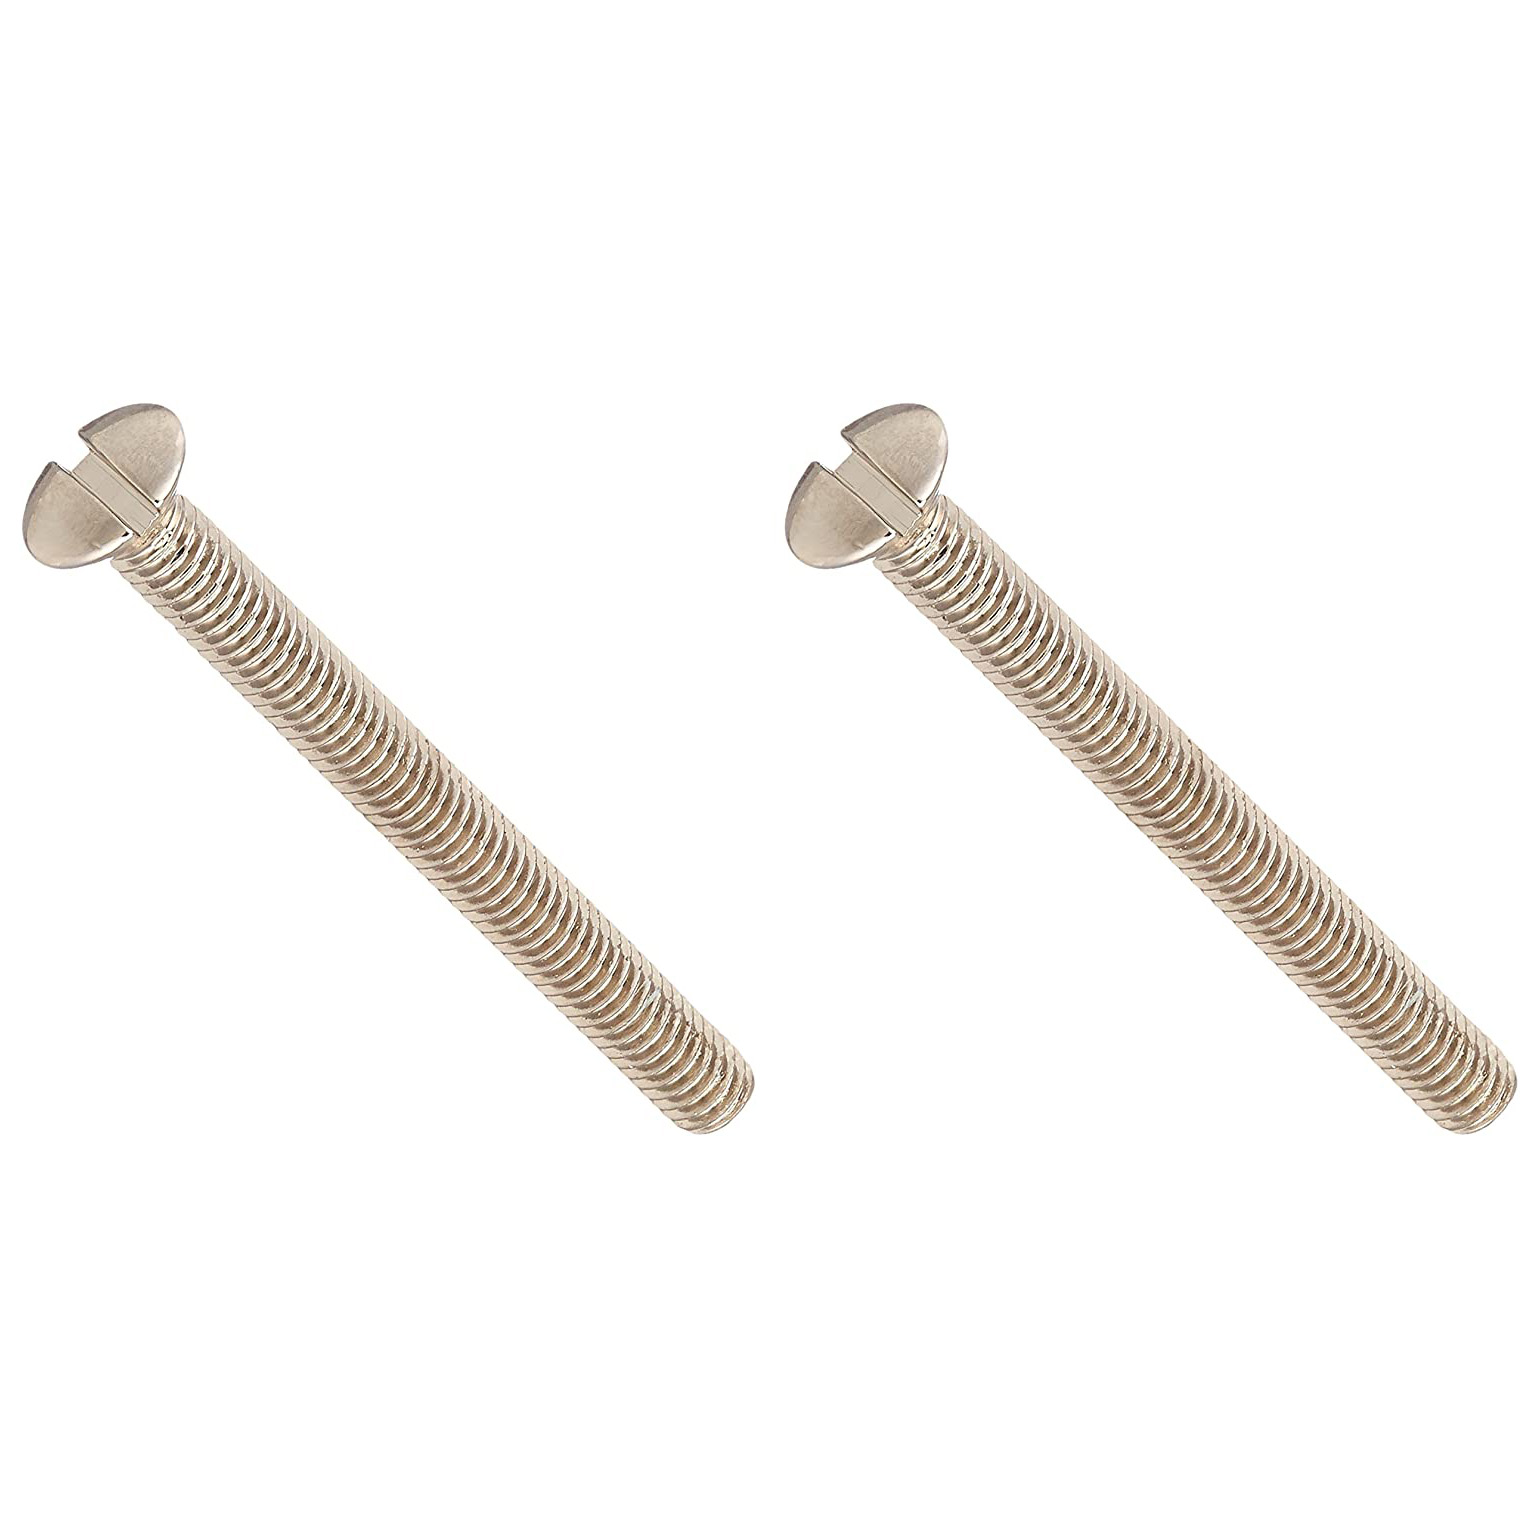 Perrin & Rowe Finished Screws Set of 2 for Mounting Bracket Polished Nickel